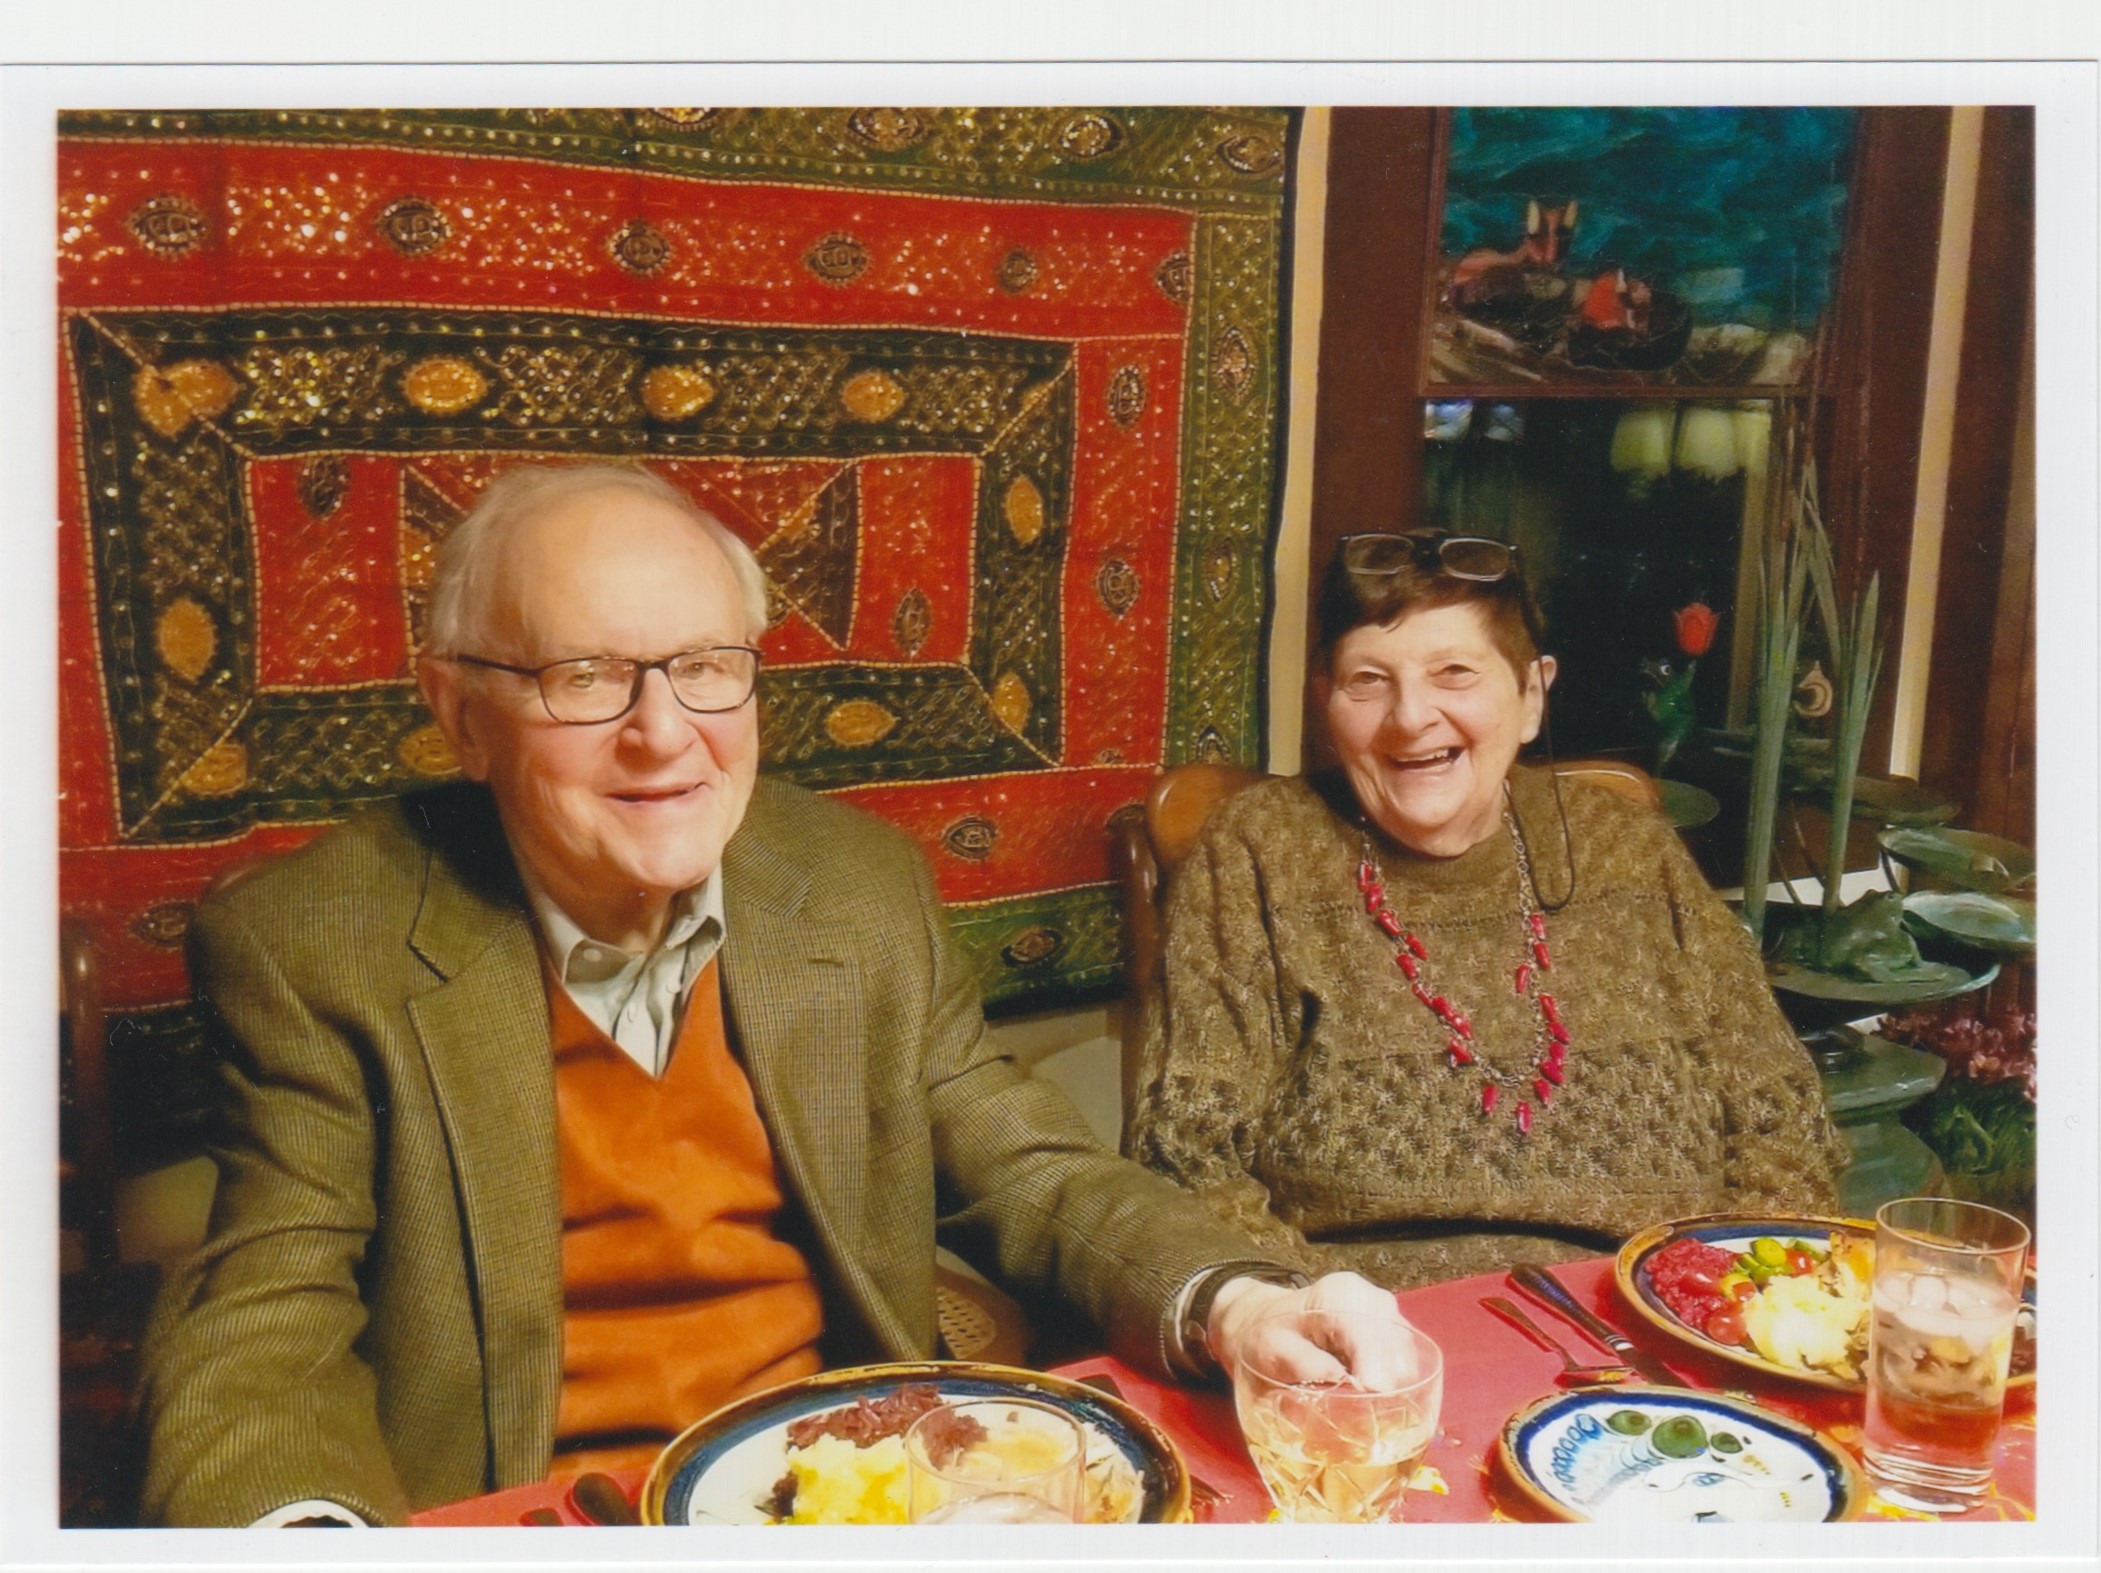 Elderly smiling couple sitting at a table, in front of a red and green wall